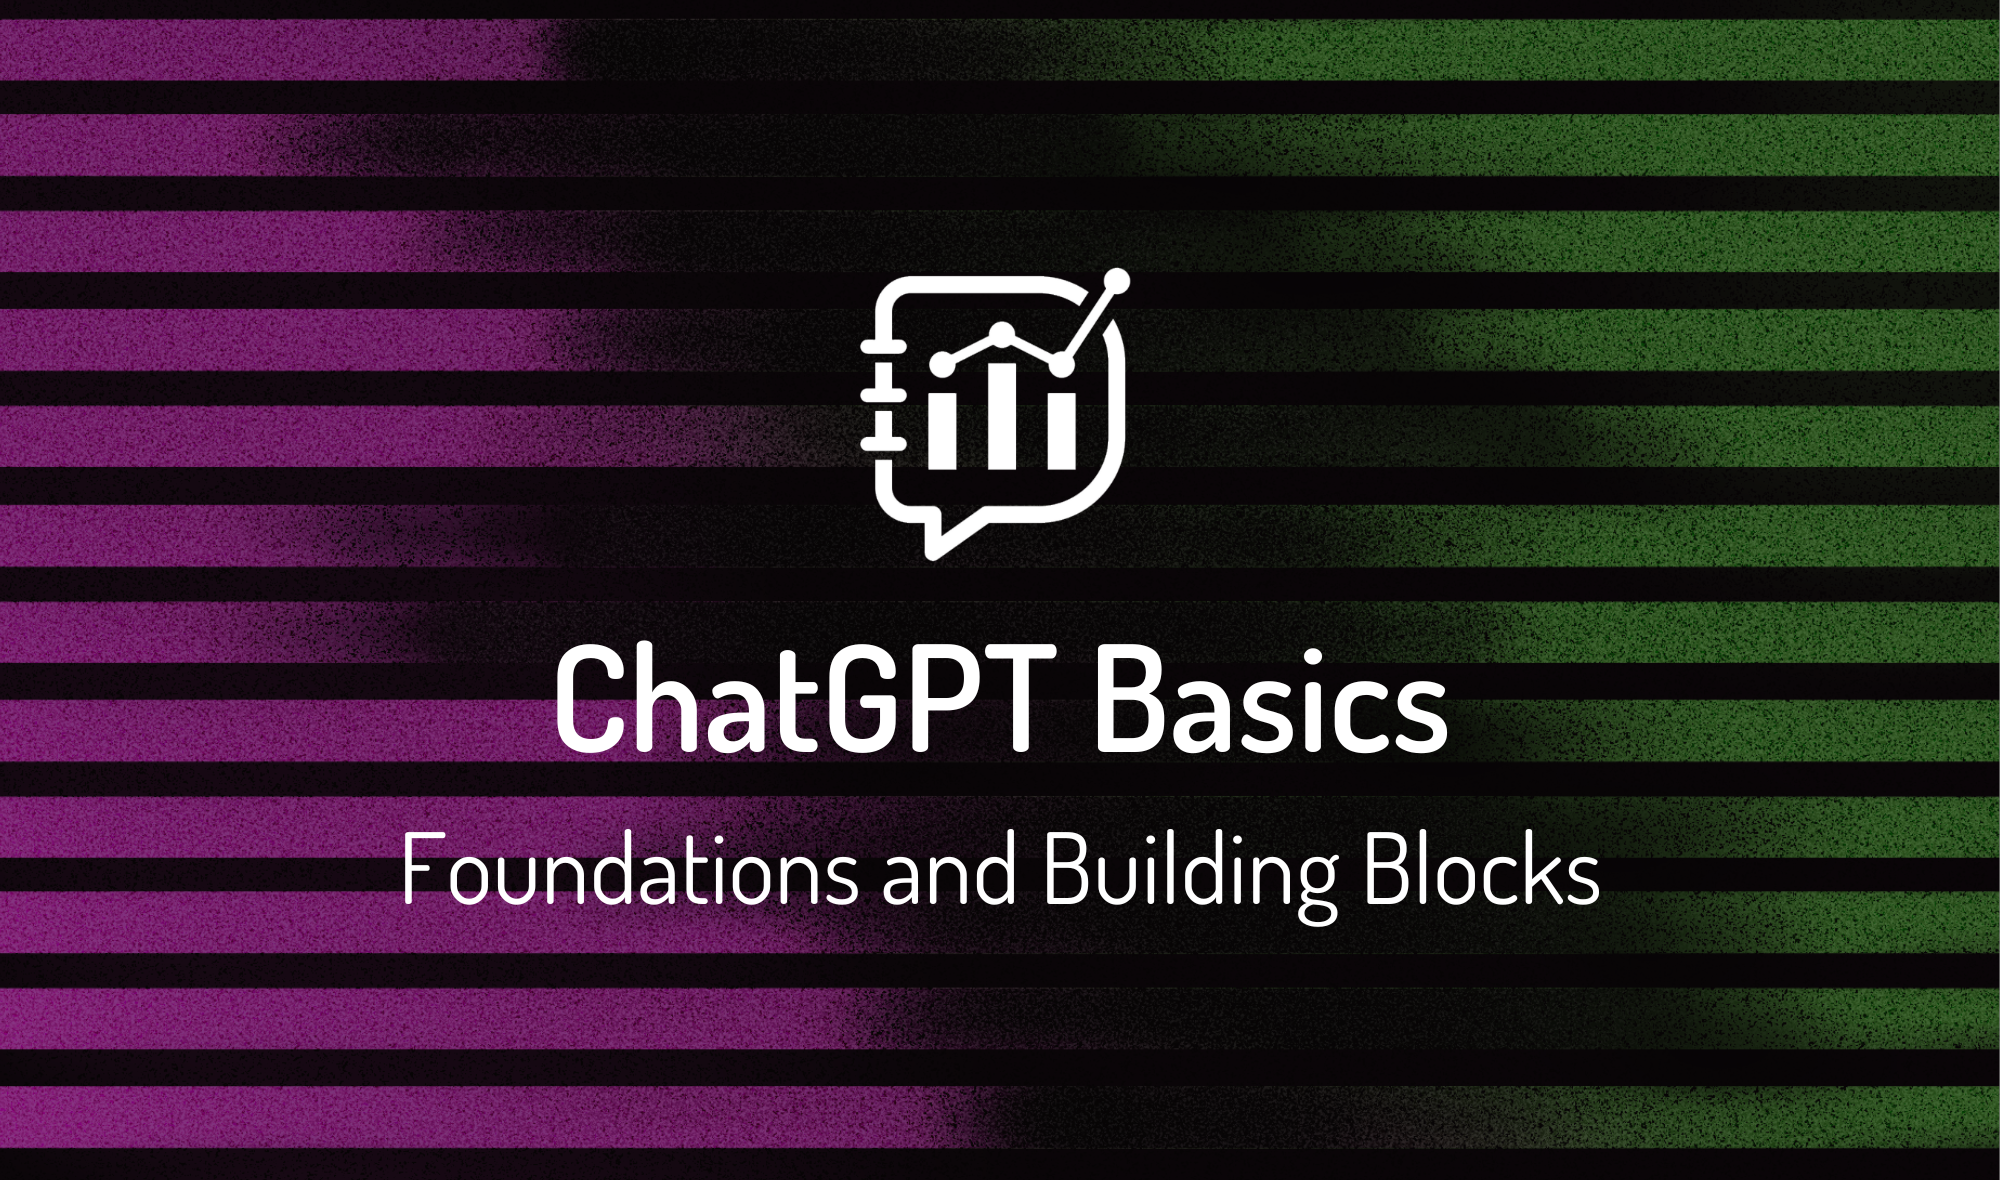 Featured image for the data literacy chatgpt basics course. The background is striped with the center faded out in black. Stripes on left alternate between purple and black. Stripes on right alternate between green and black. Centered in the middle in white is the data literacy logo and below that it reads chatgpt basics foundations and getting started.